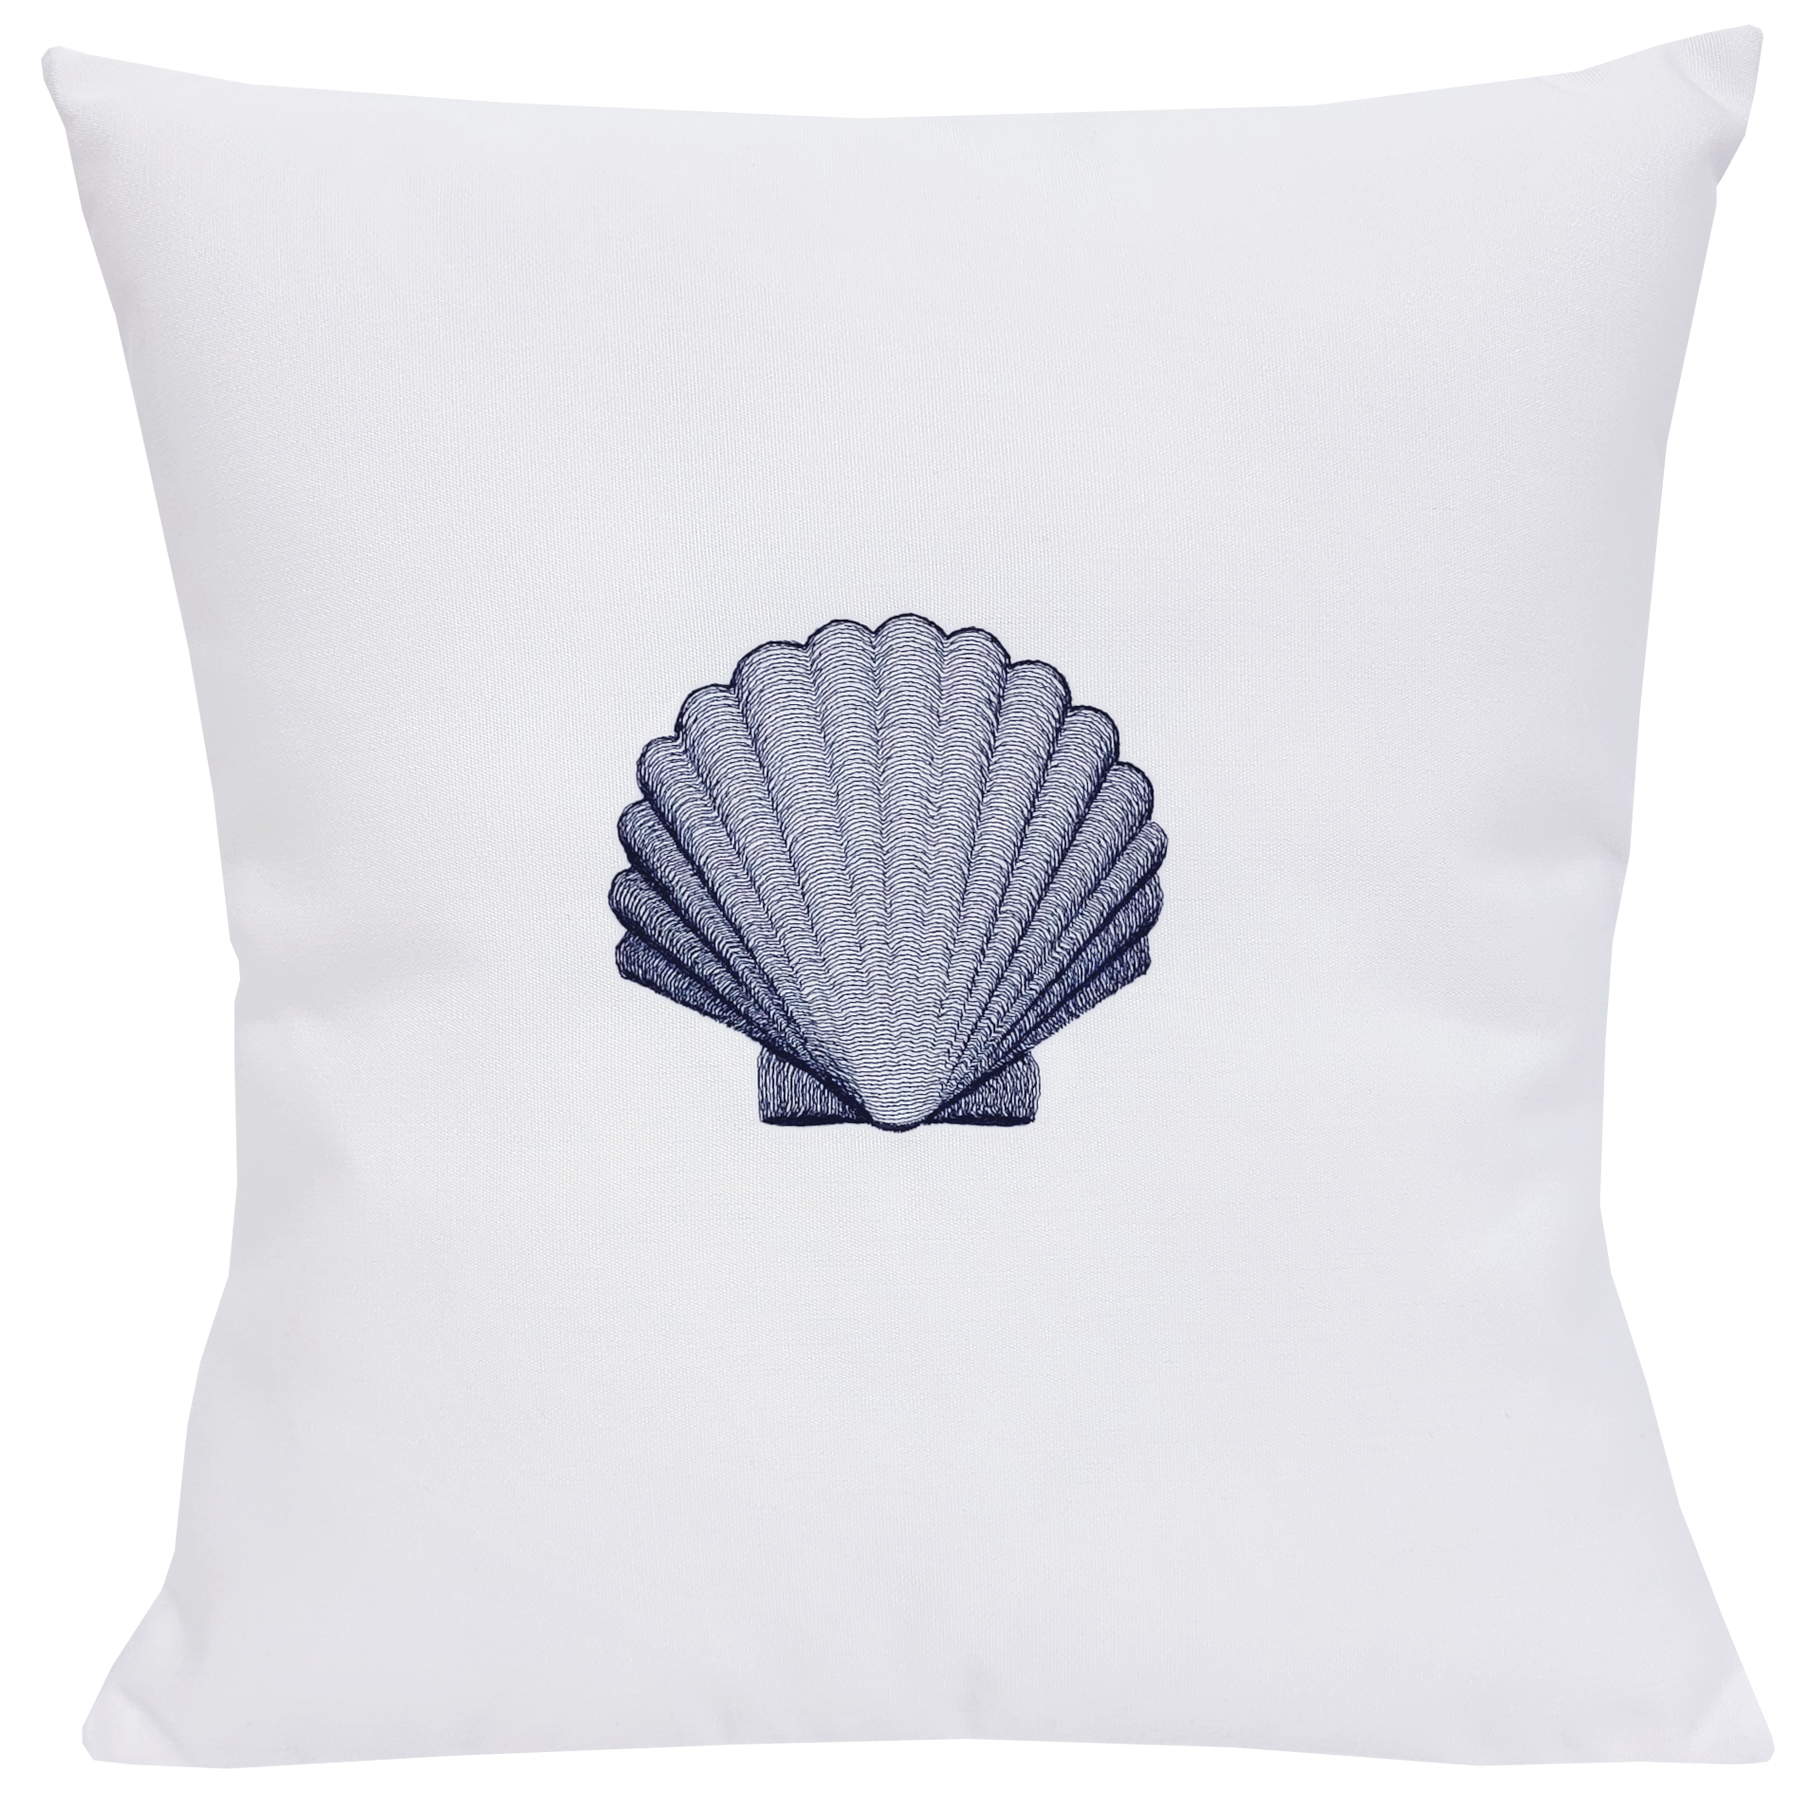 Scallop Shell in Navy on White